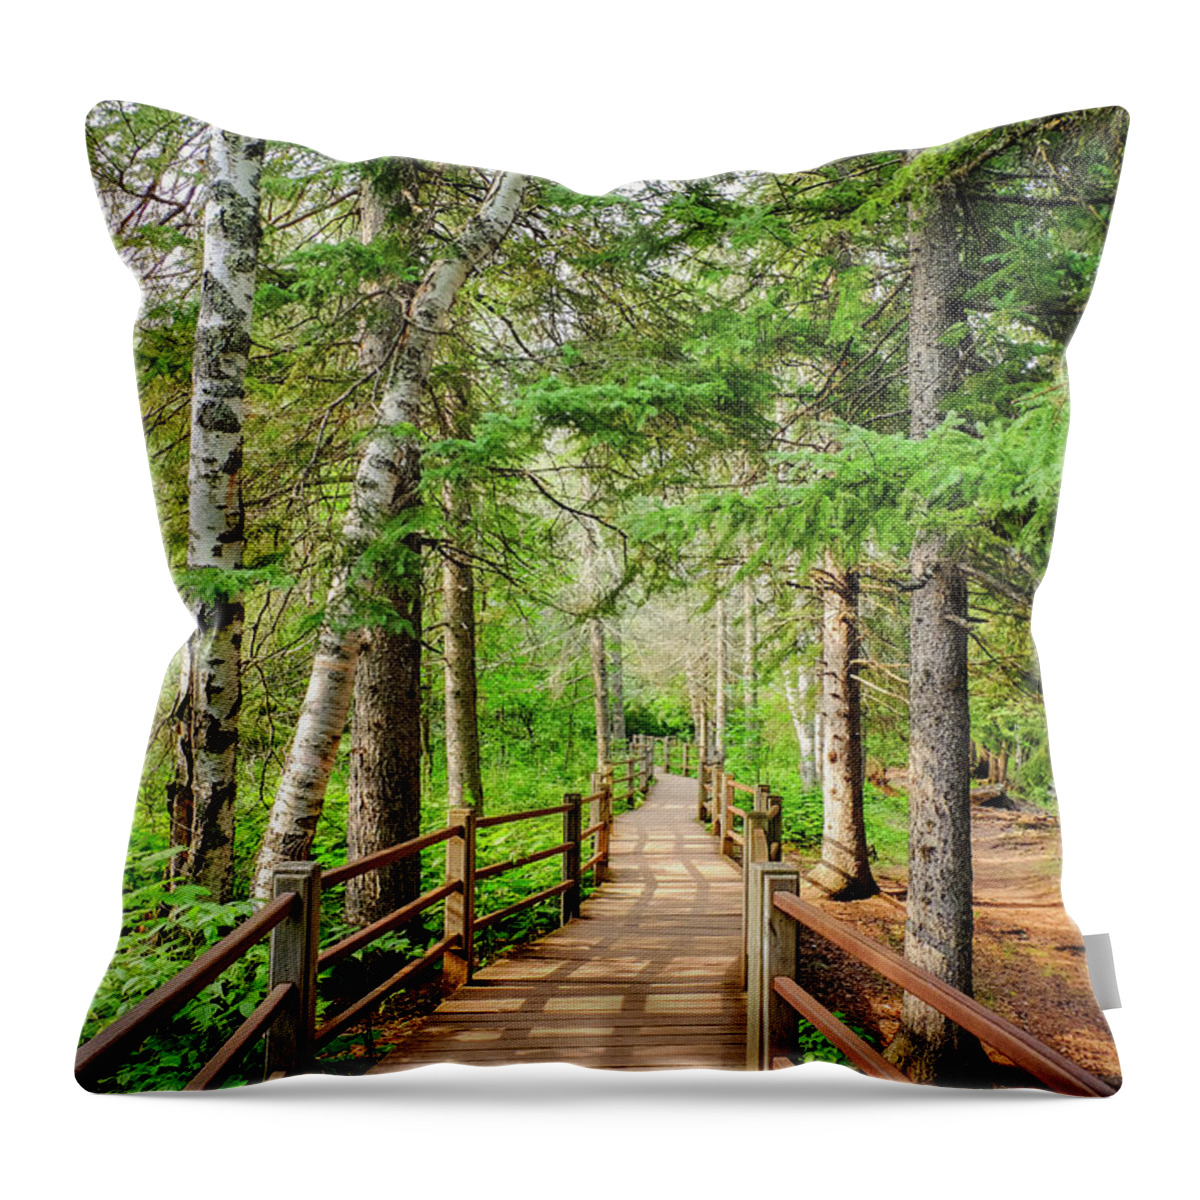 Destination Throw Pillow featuring the photograph Hiking Trail by Iryna Liveoak